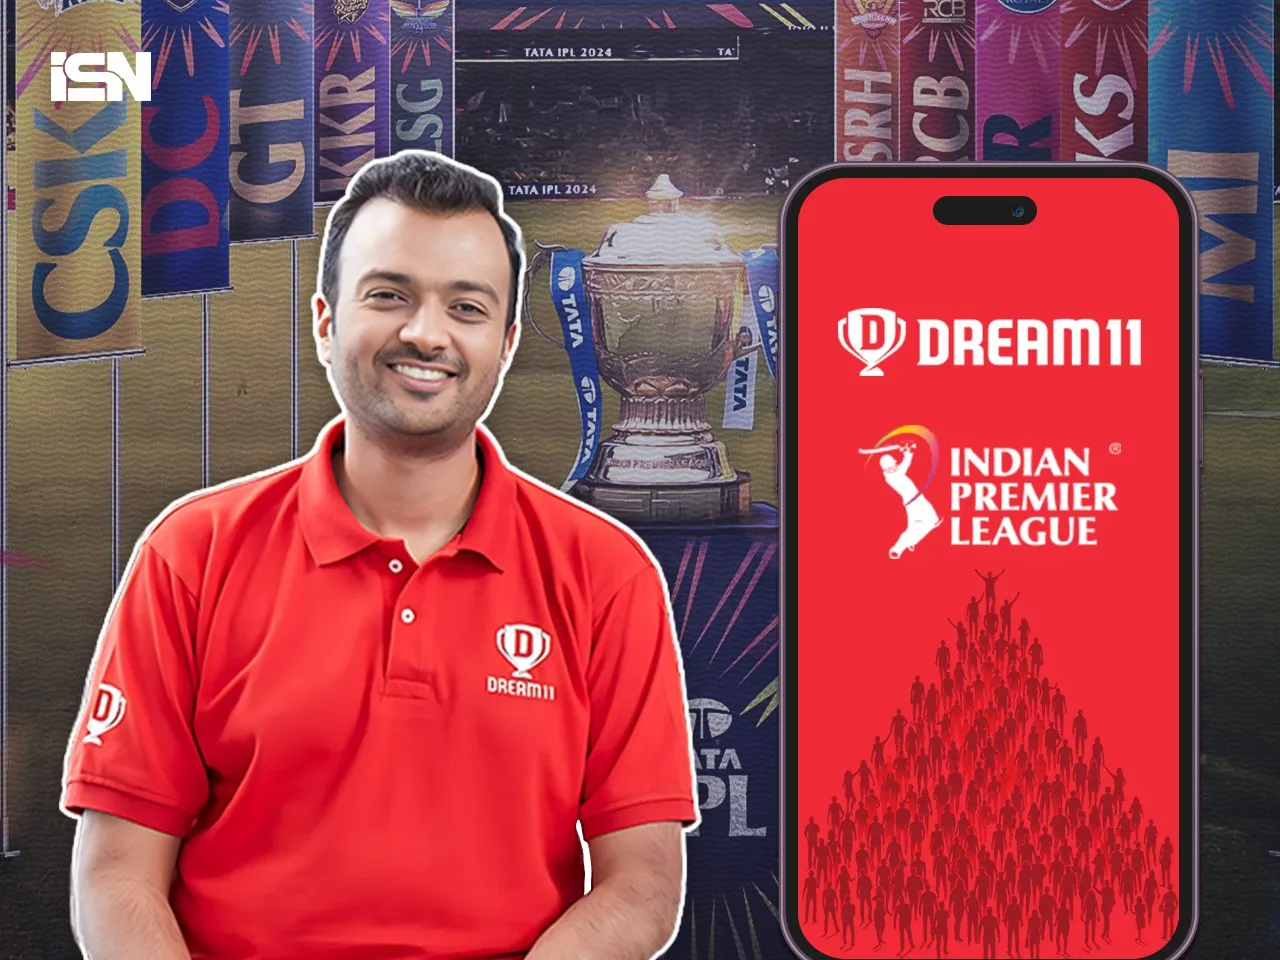 Fantasy gaming platform Dream11 makes its IPL debut and onboards 11 lakh new users